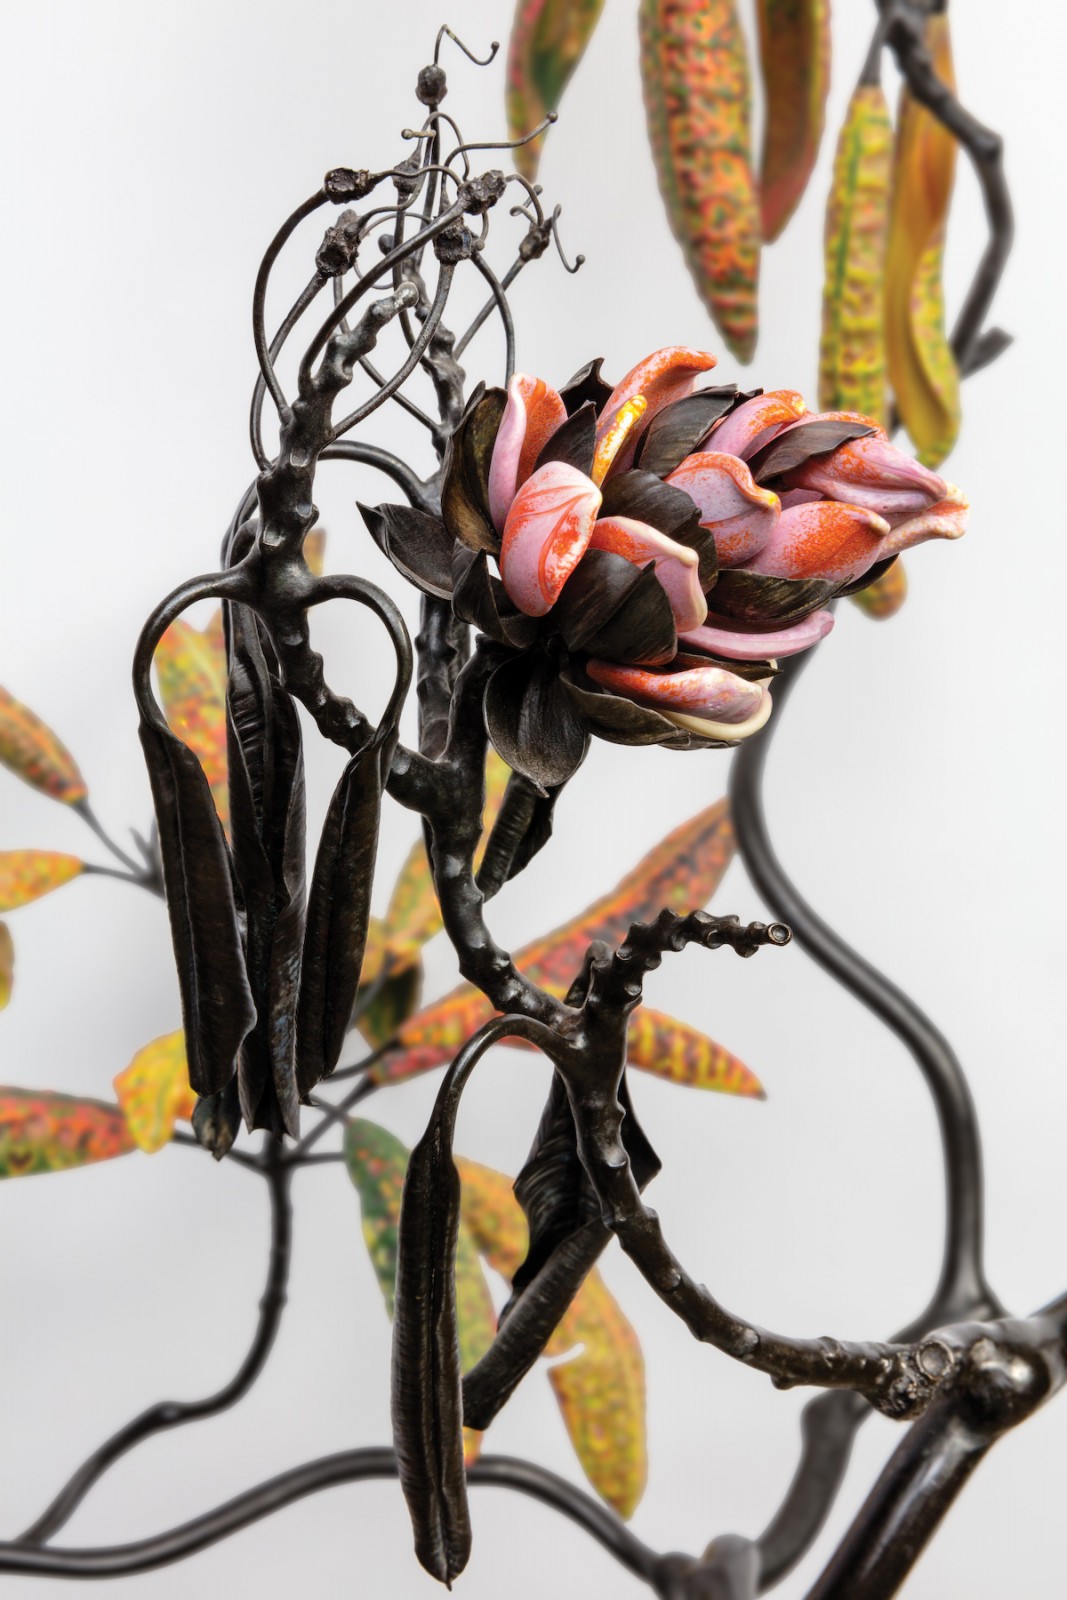 Sculptures Of Exotic Plants Made Of Clay, Glass, And Metal By Michael Sherrill (6)